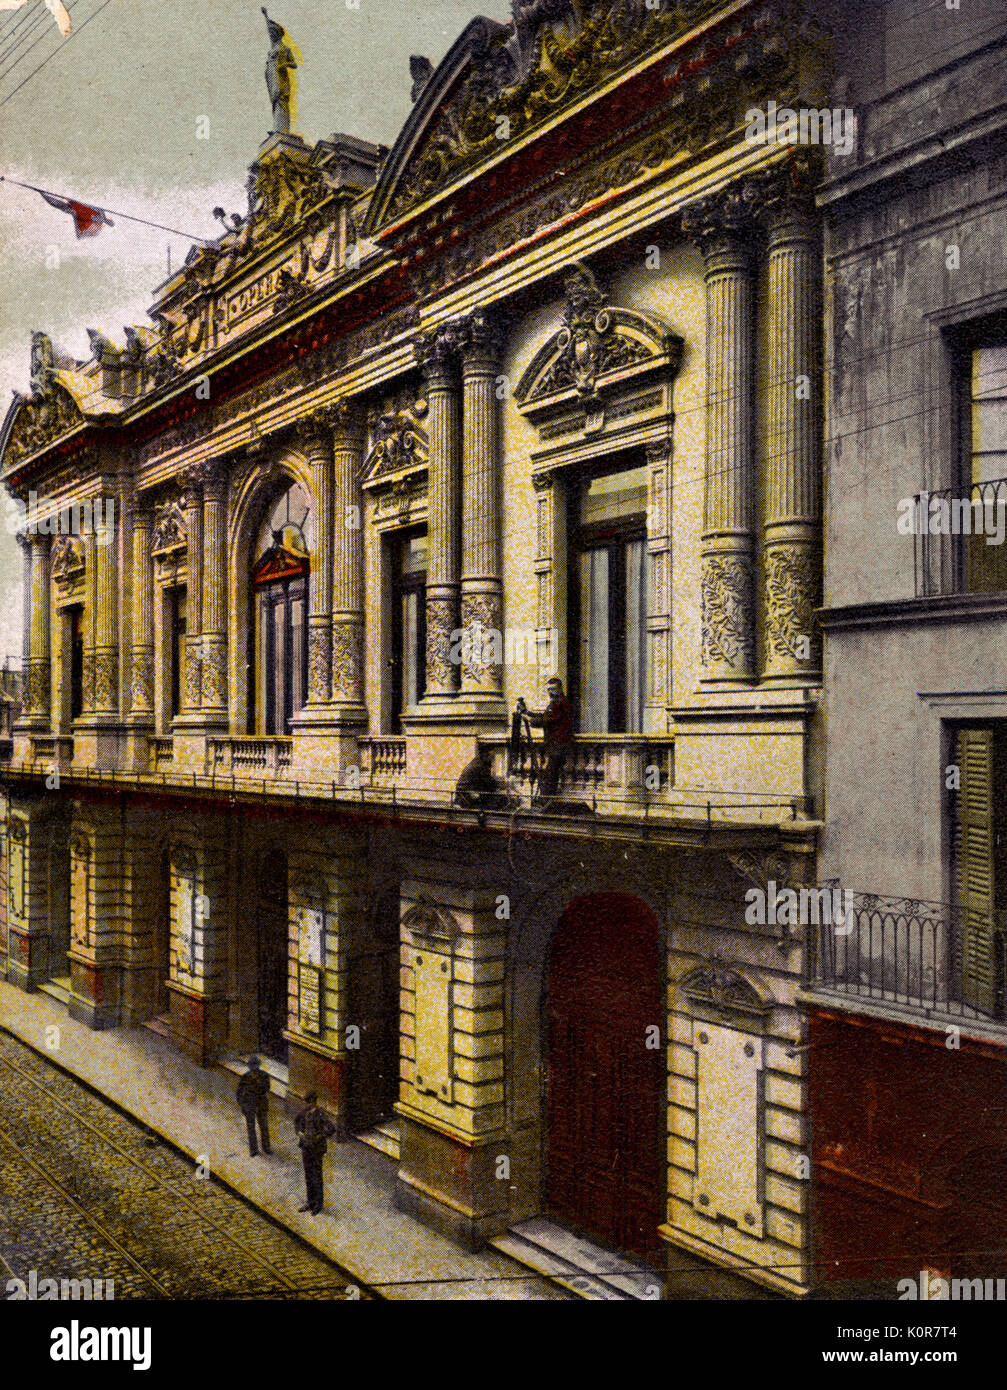 Opernhaus Teatro Colon in Buenos Aires. Anfang 1900 Stockfoto